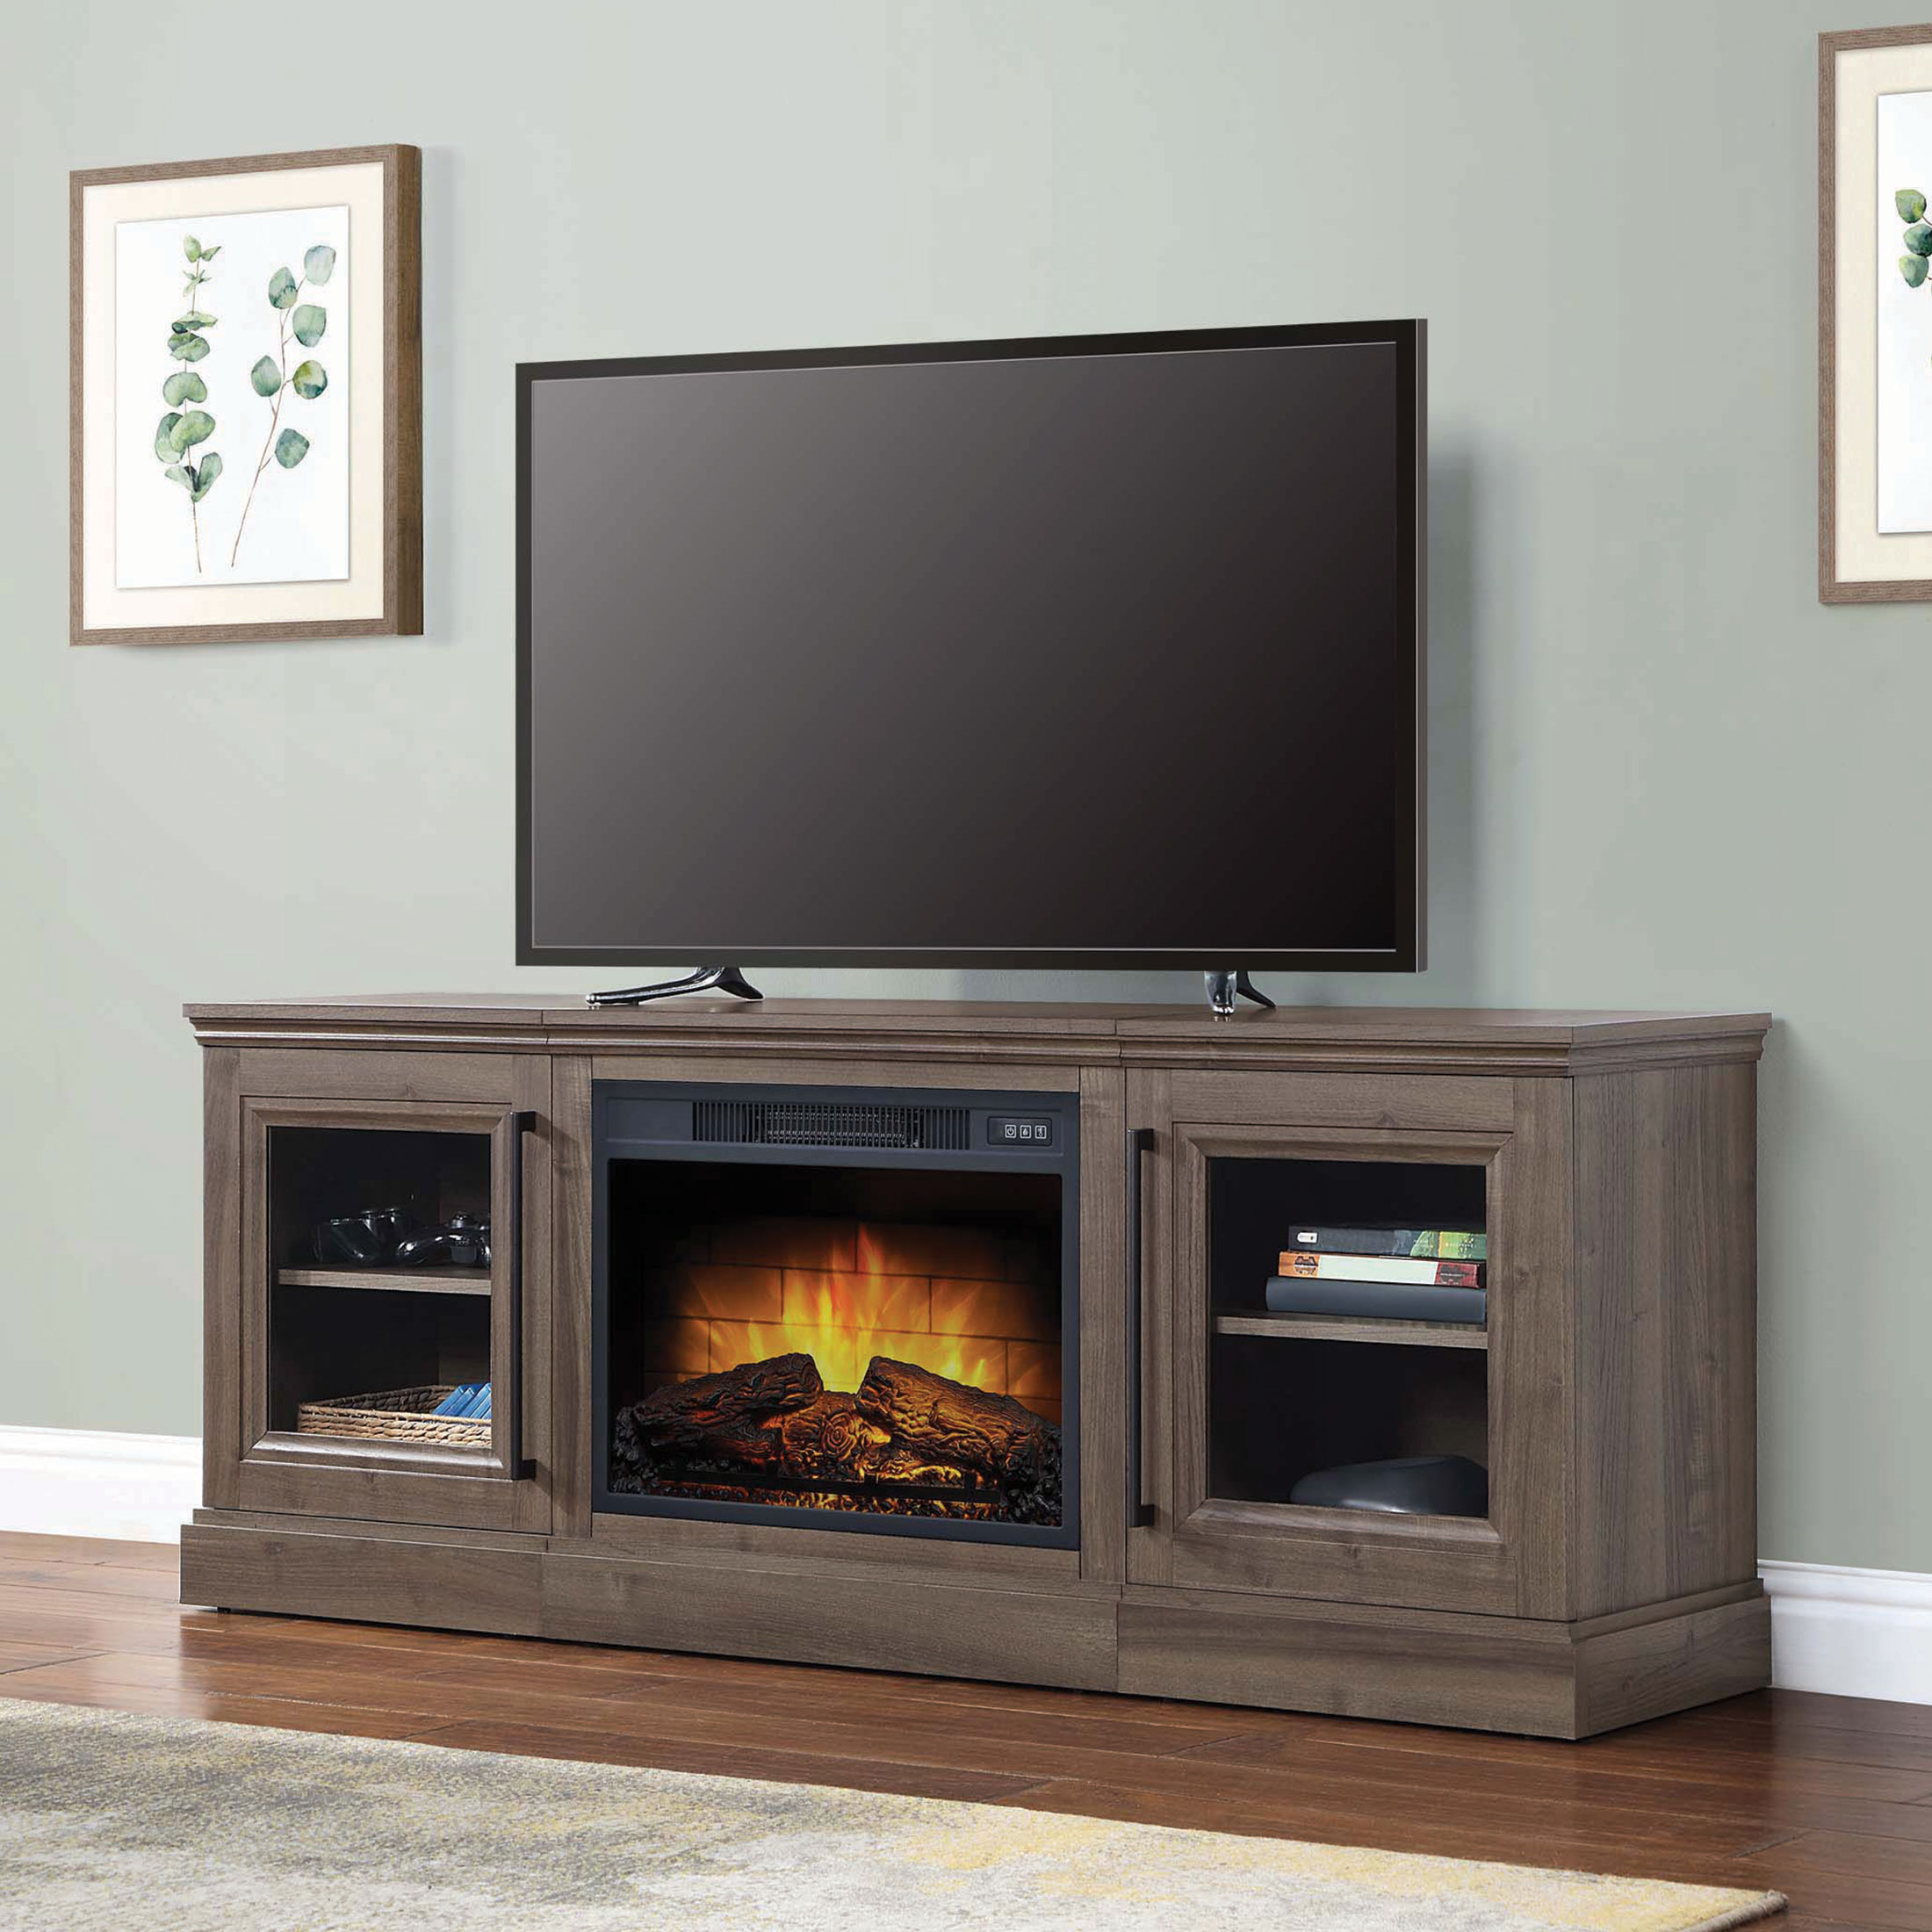 Whalen Furniture Quantum Flame Media Fireplace TV Stand for TV’s up to 75”, Walnut Brown Finish - image 1 of 12